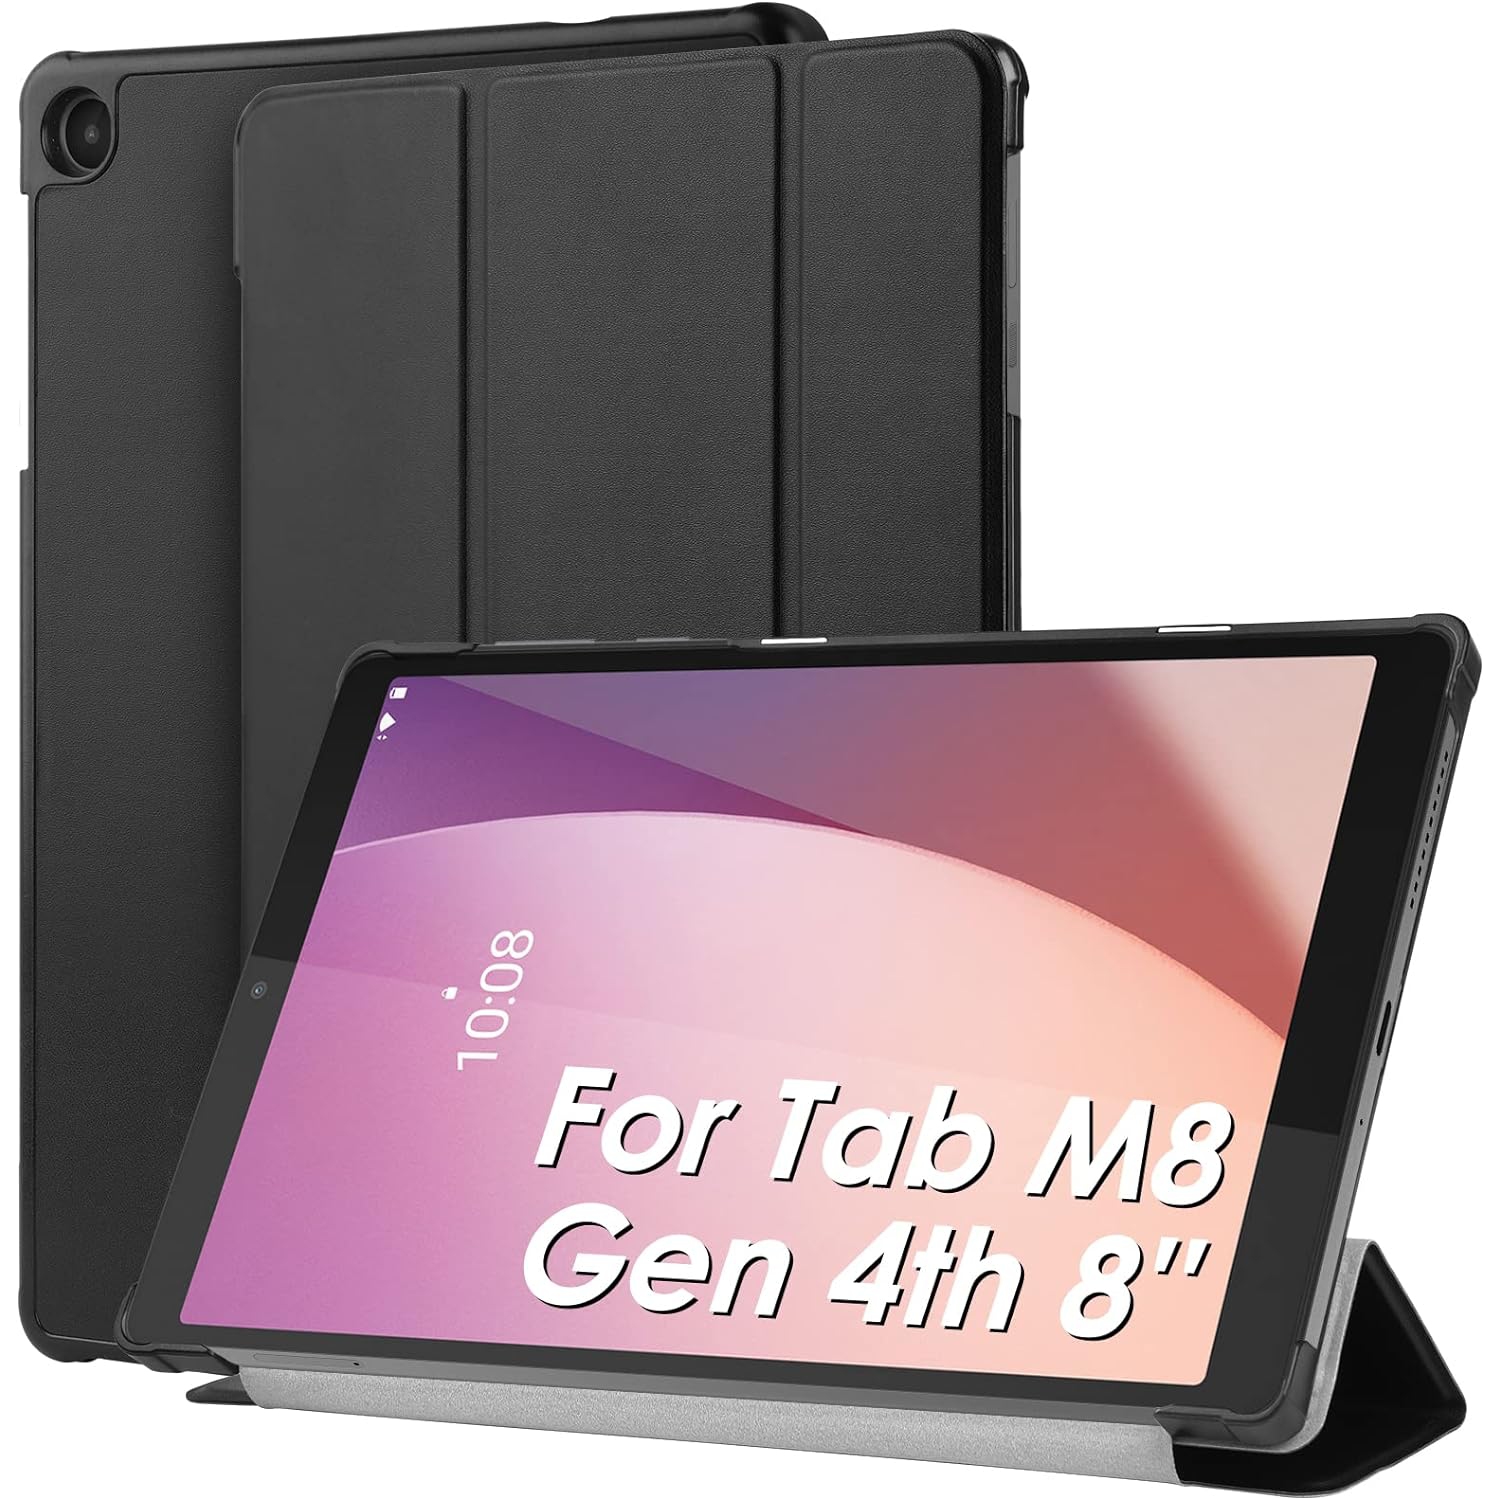 Protective Case Compatible with Lenovo Tab M8 (Gen 4th) 8", Multi-Viewing Angles, Slim Stand Hard Back Shell PU